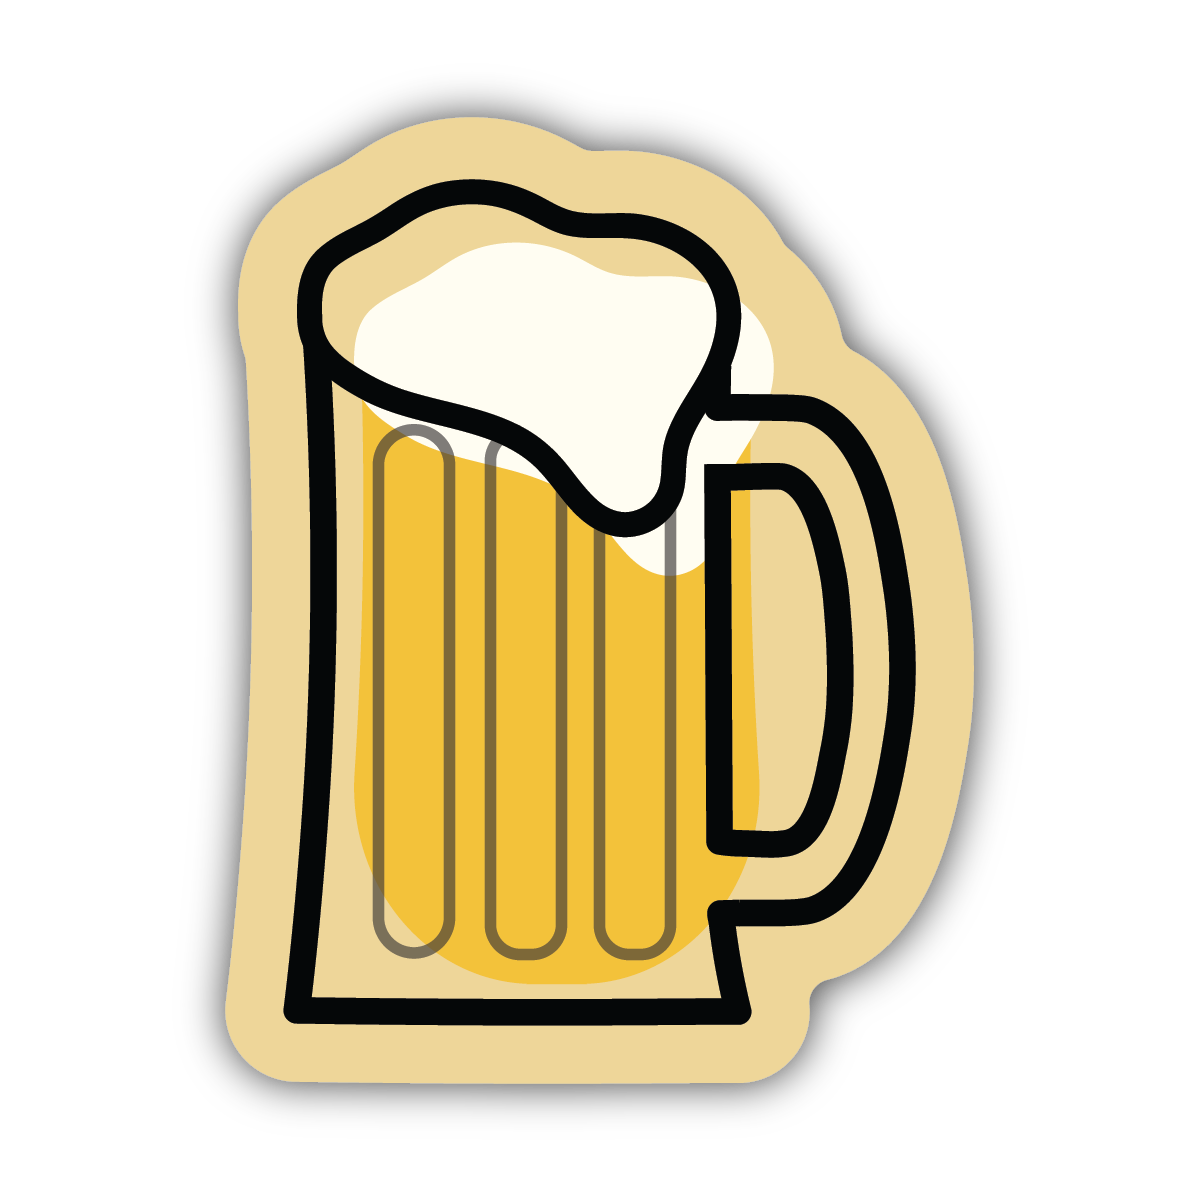 sticker on white background. sticker has a cream background and a beer glass graphic filled with beer and foam on top.